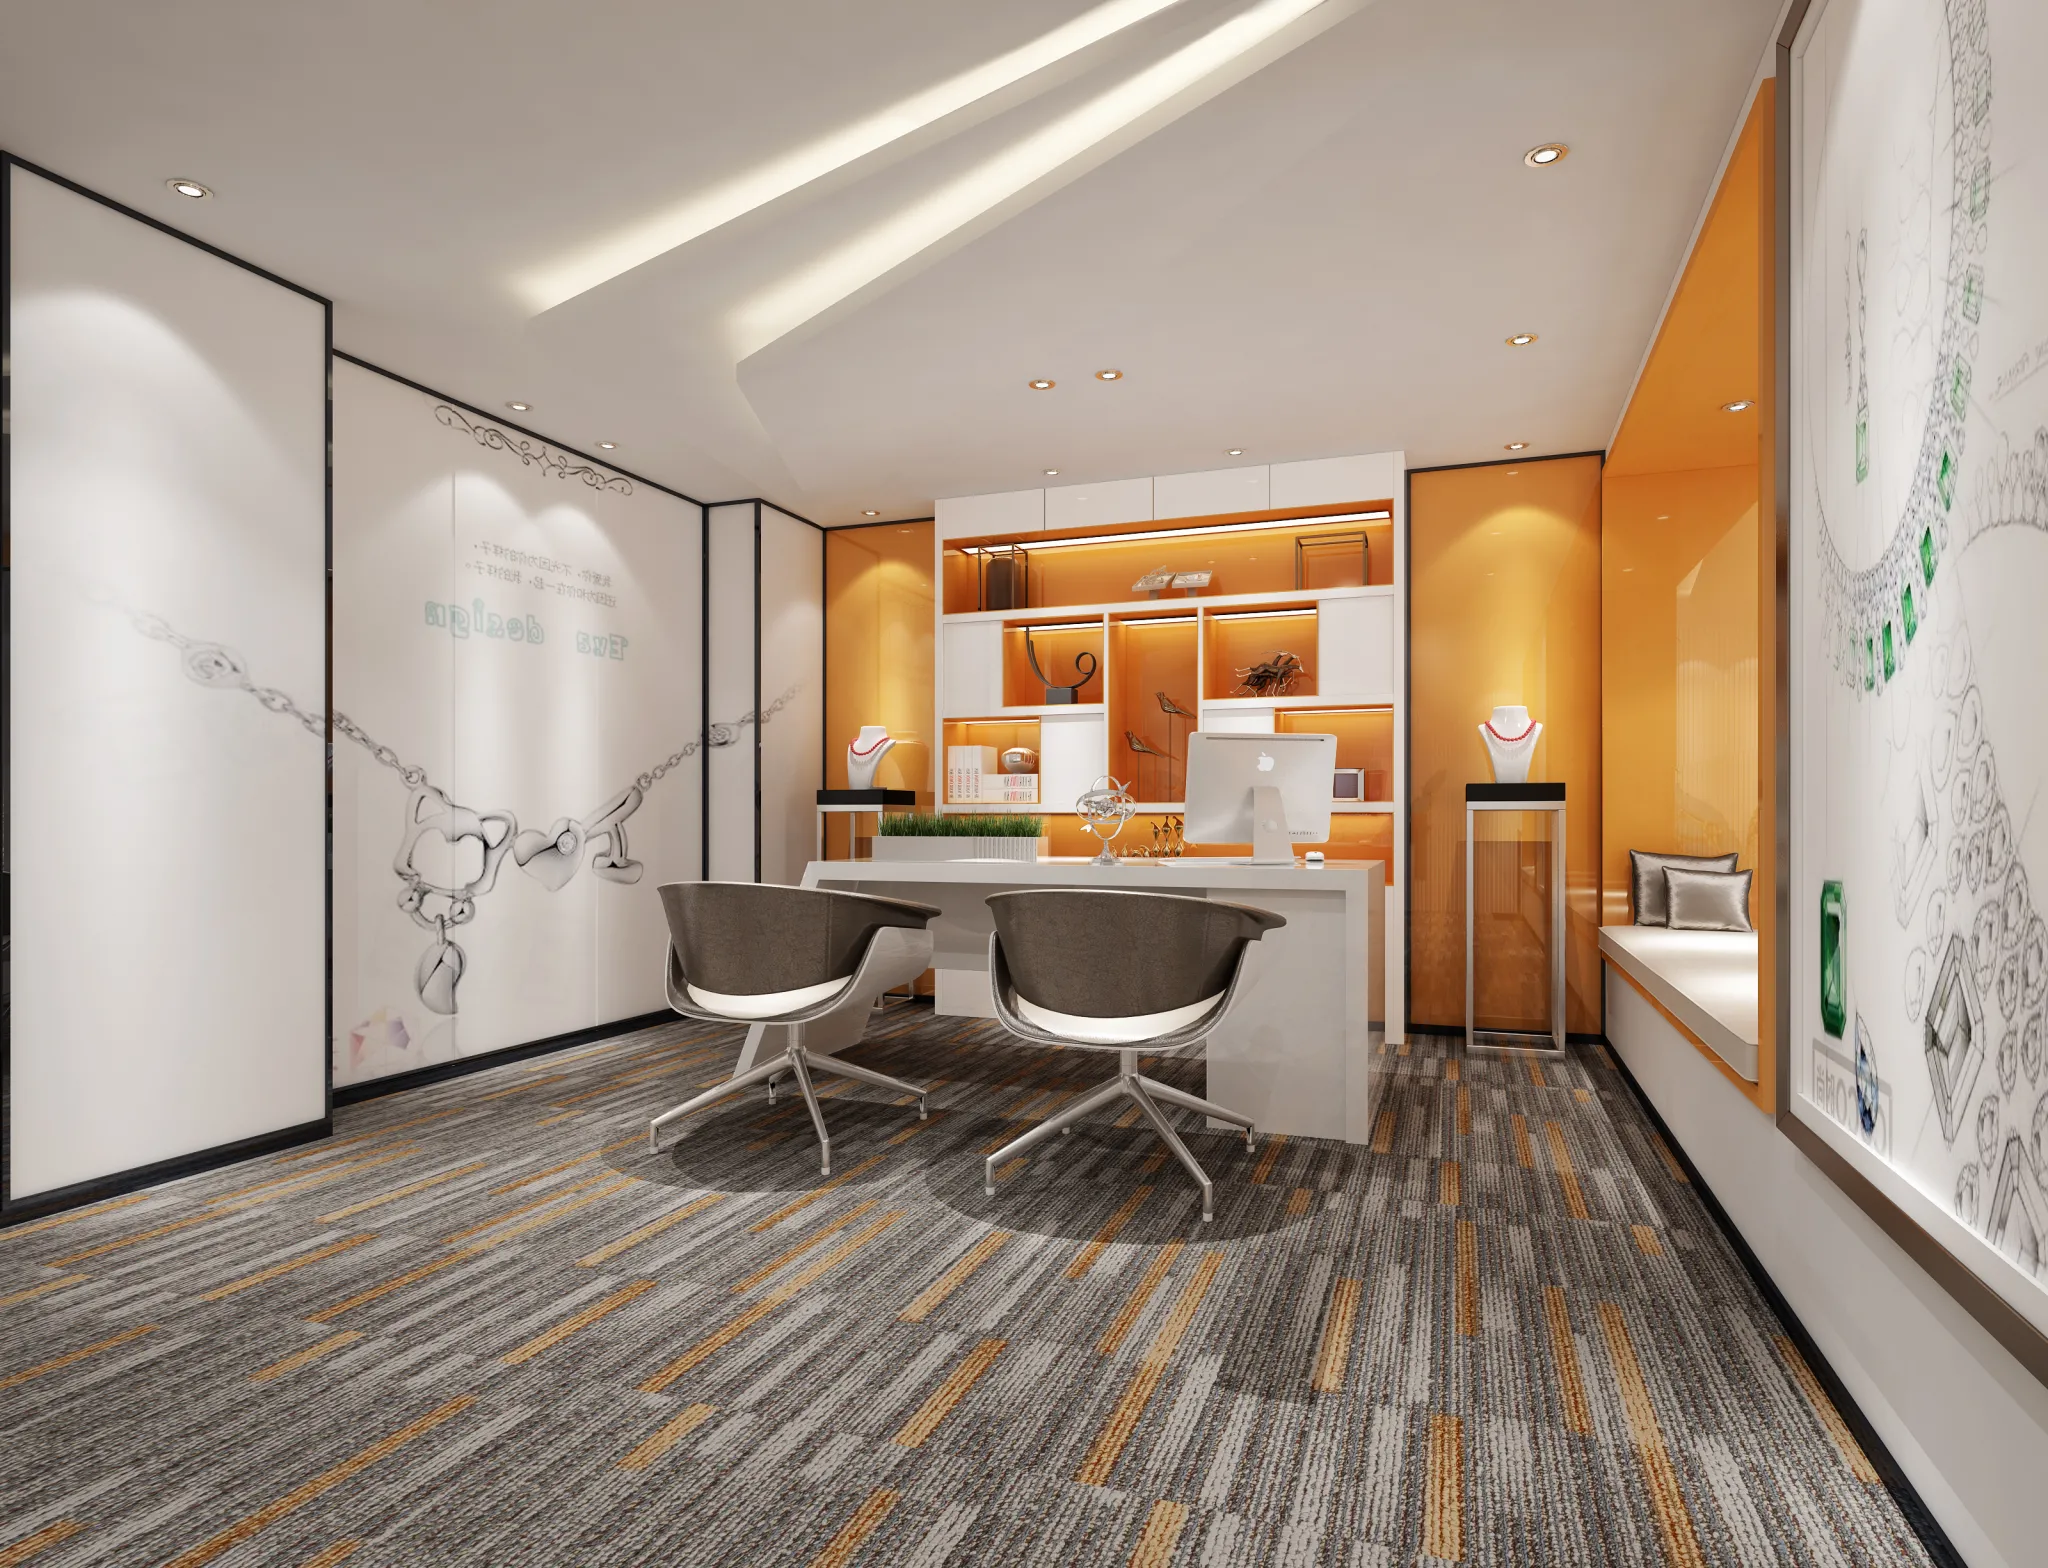 TZ INTERIOR DESIGN 2021 (VRAY) – 21. MANAGER OFFICE – 02